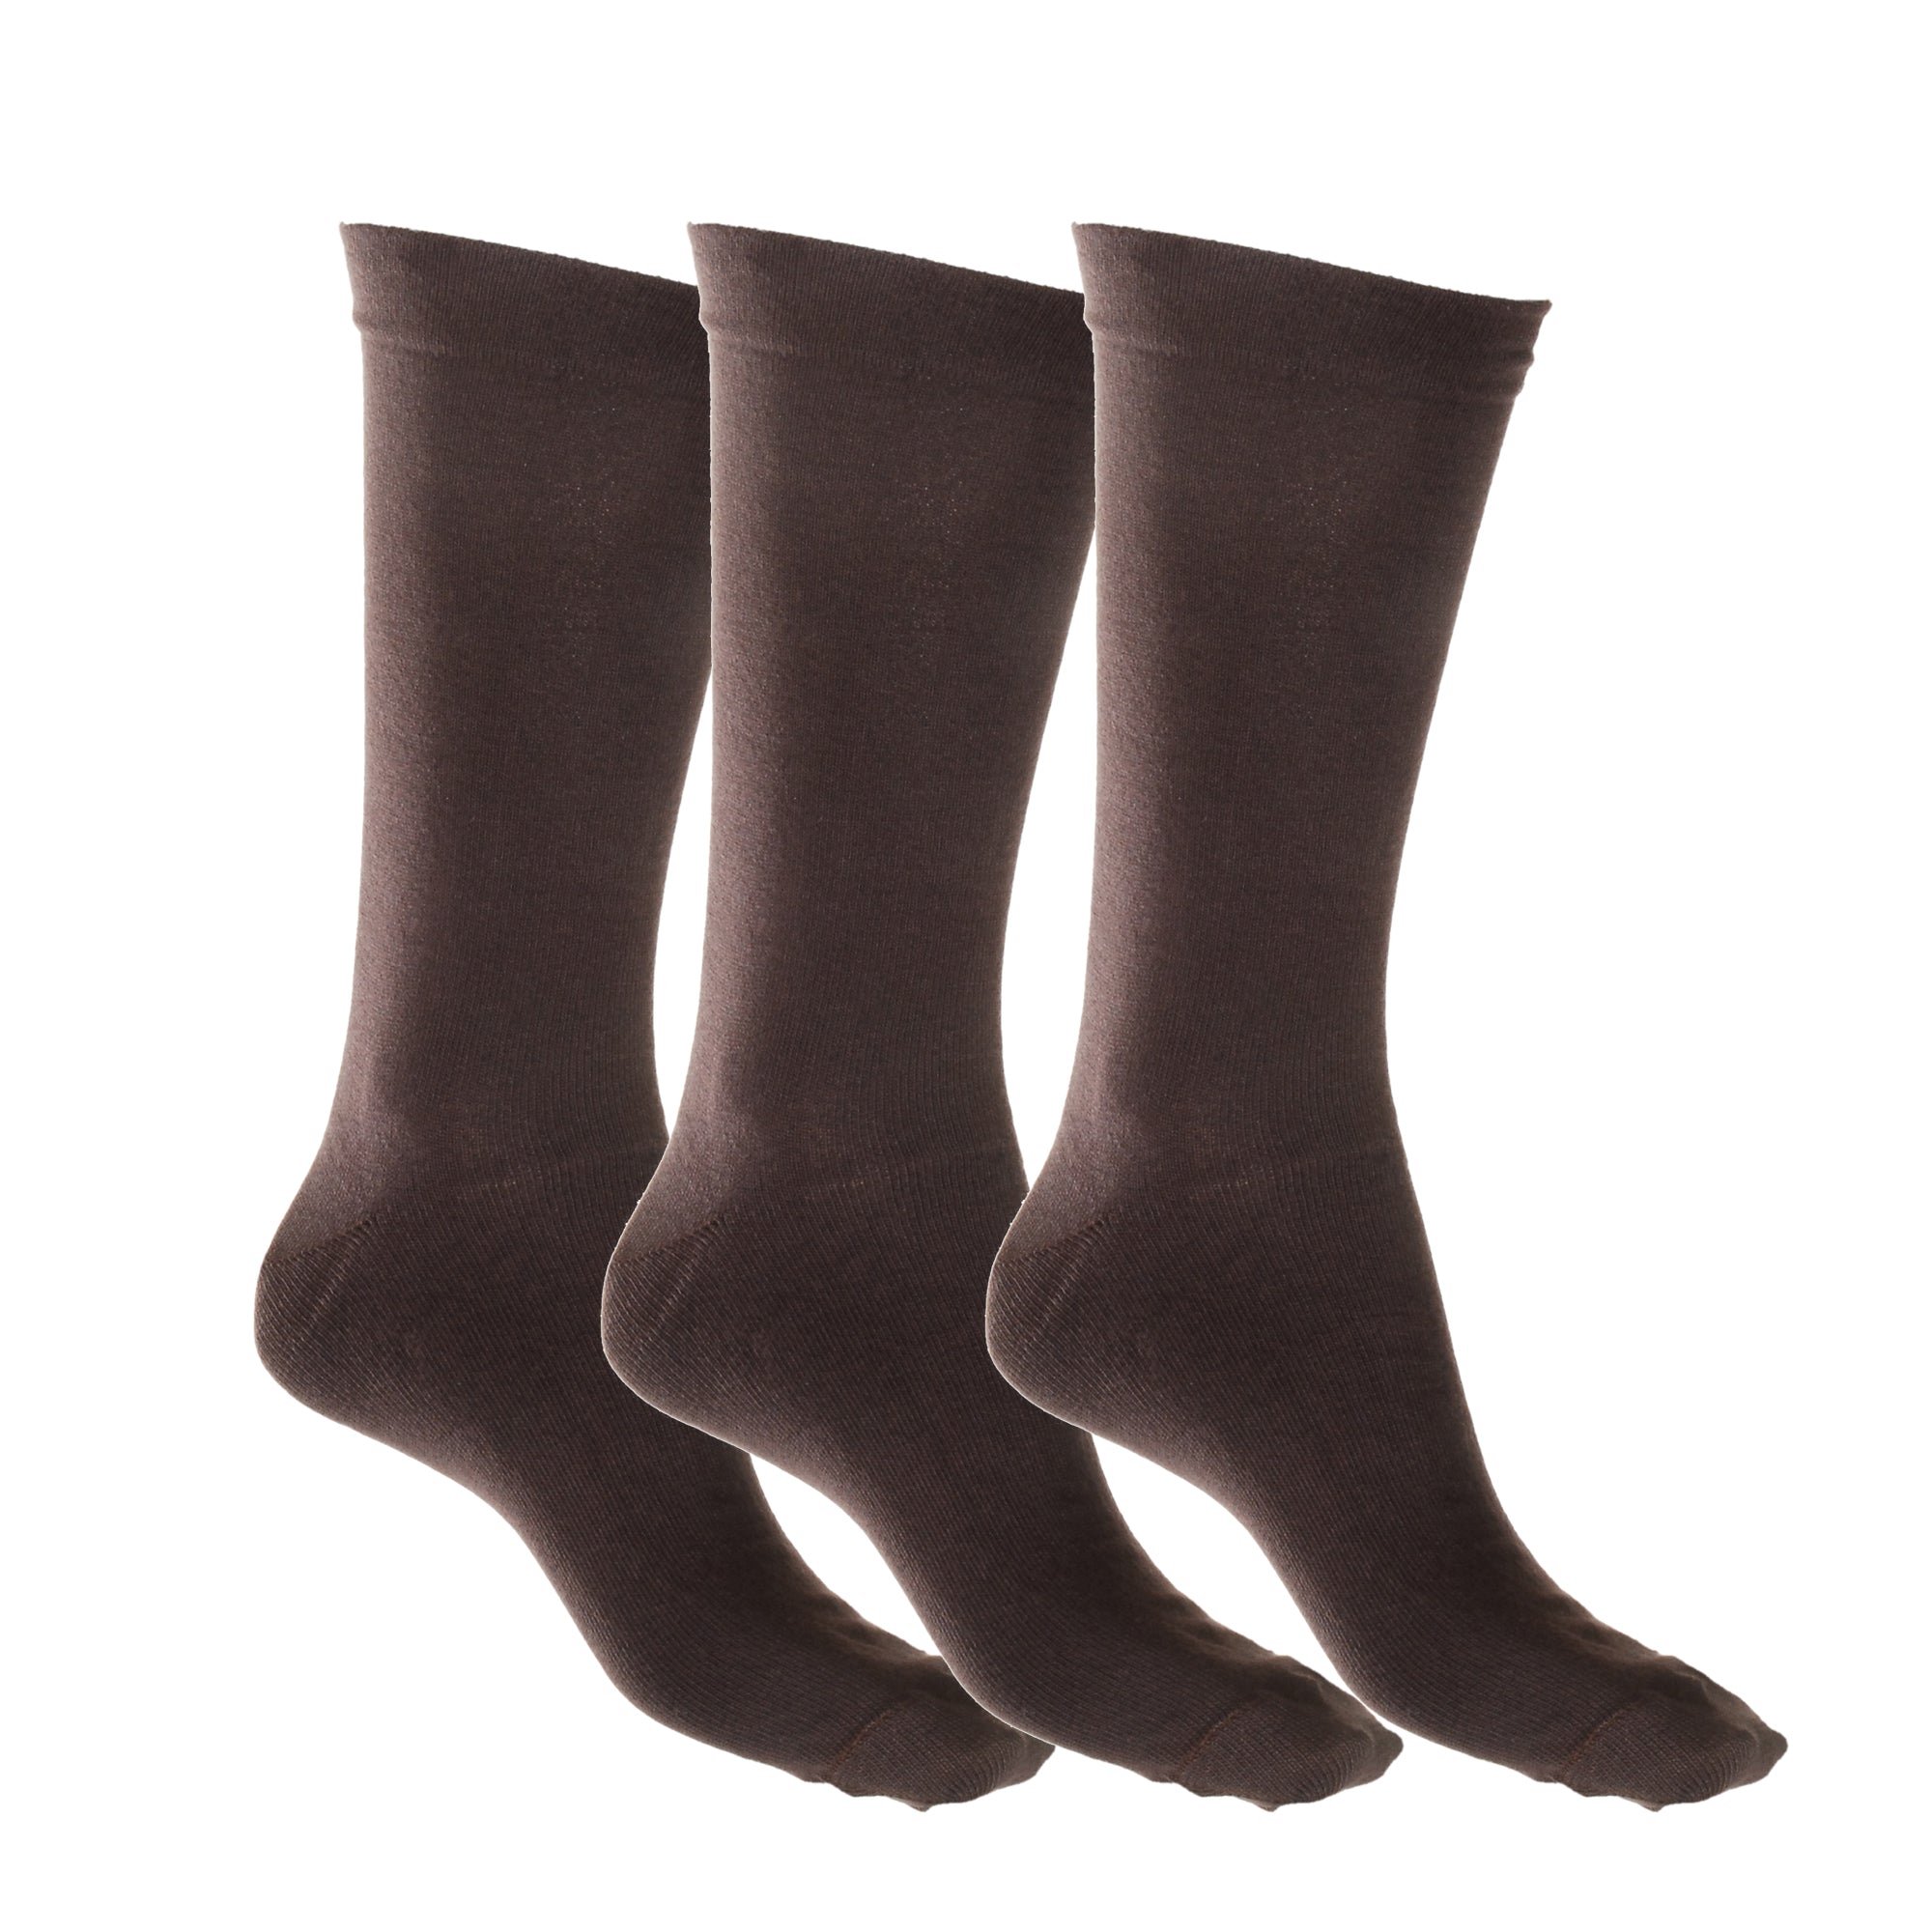 Loose Top Cotton Sock with Tough Toe™ Chocolate - 3 Pack Sale